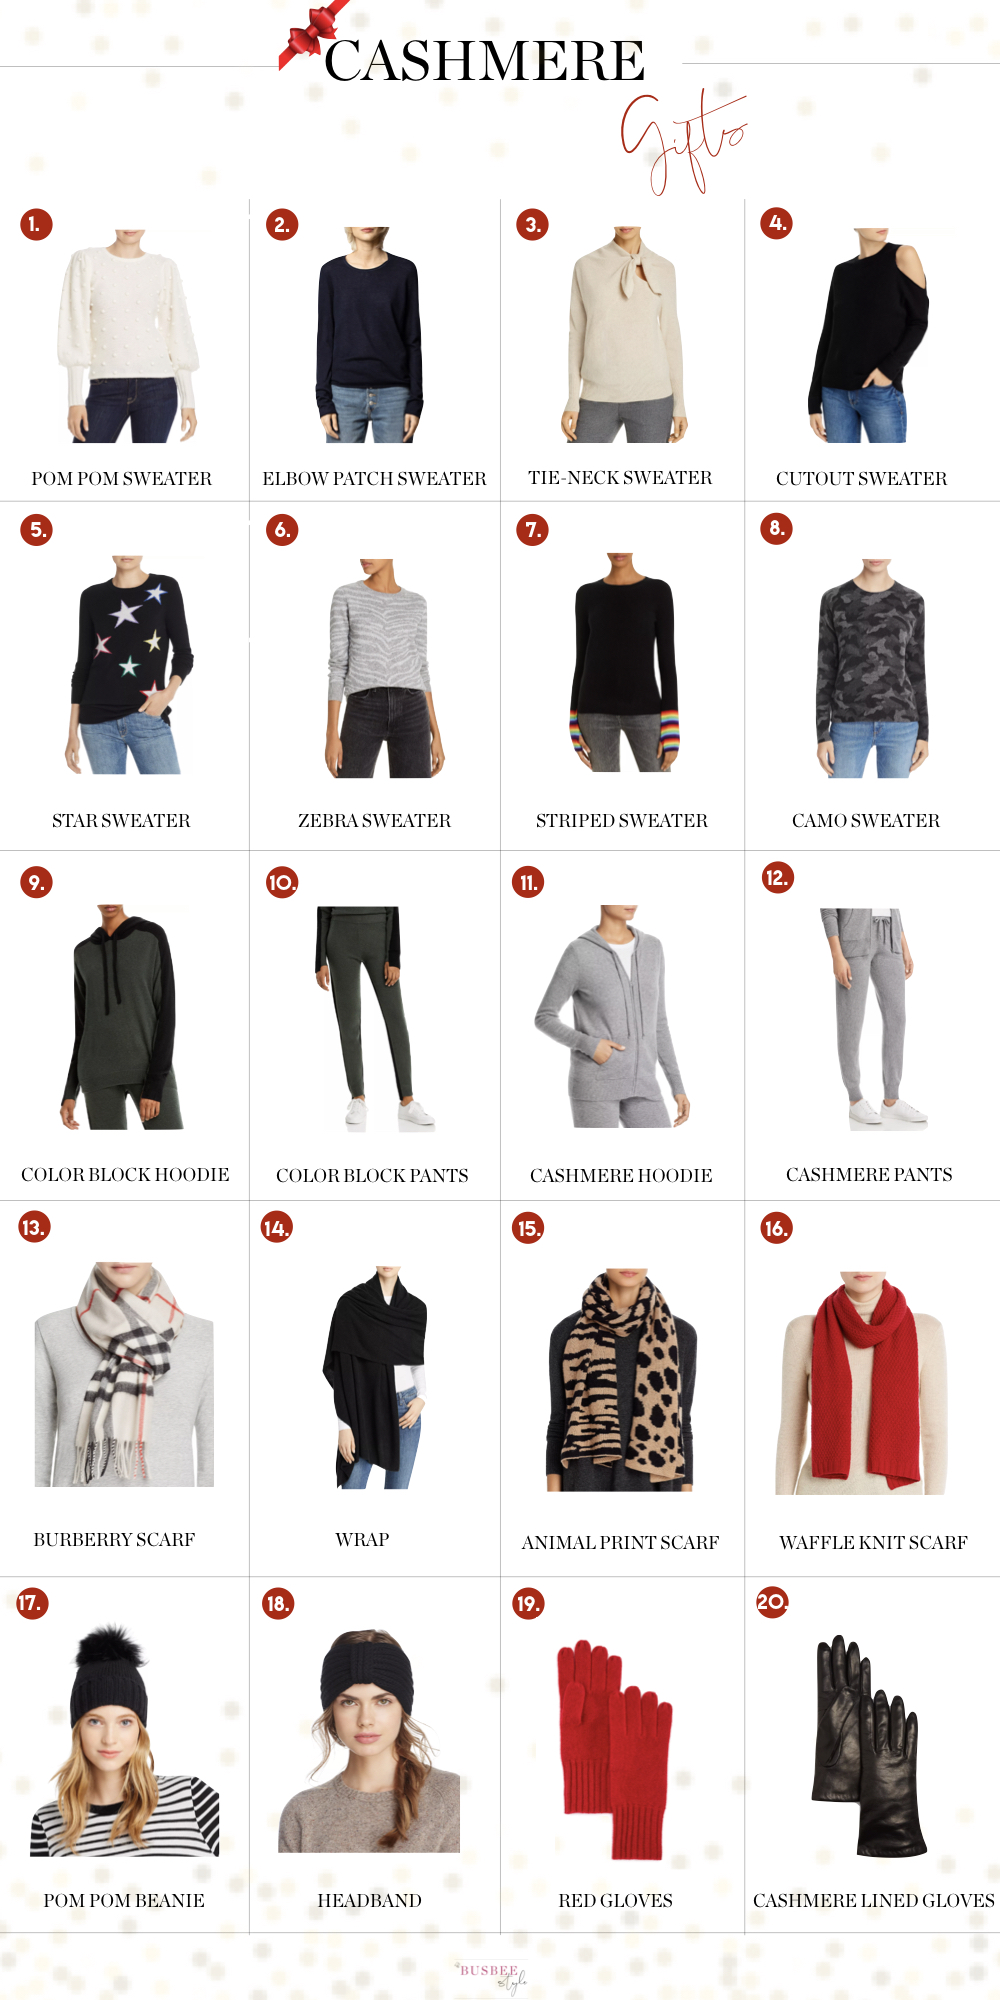 cashmere gift guide including 20 cashmere gifts from bloomingdales